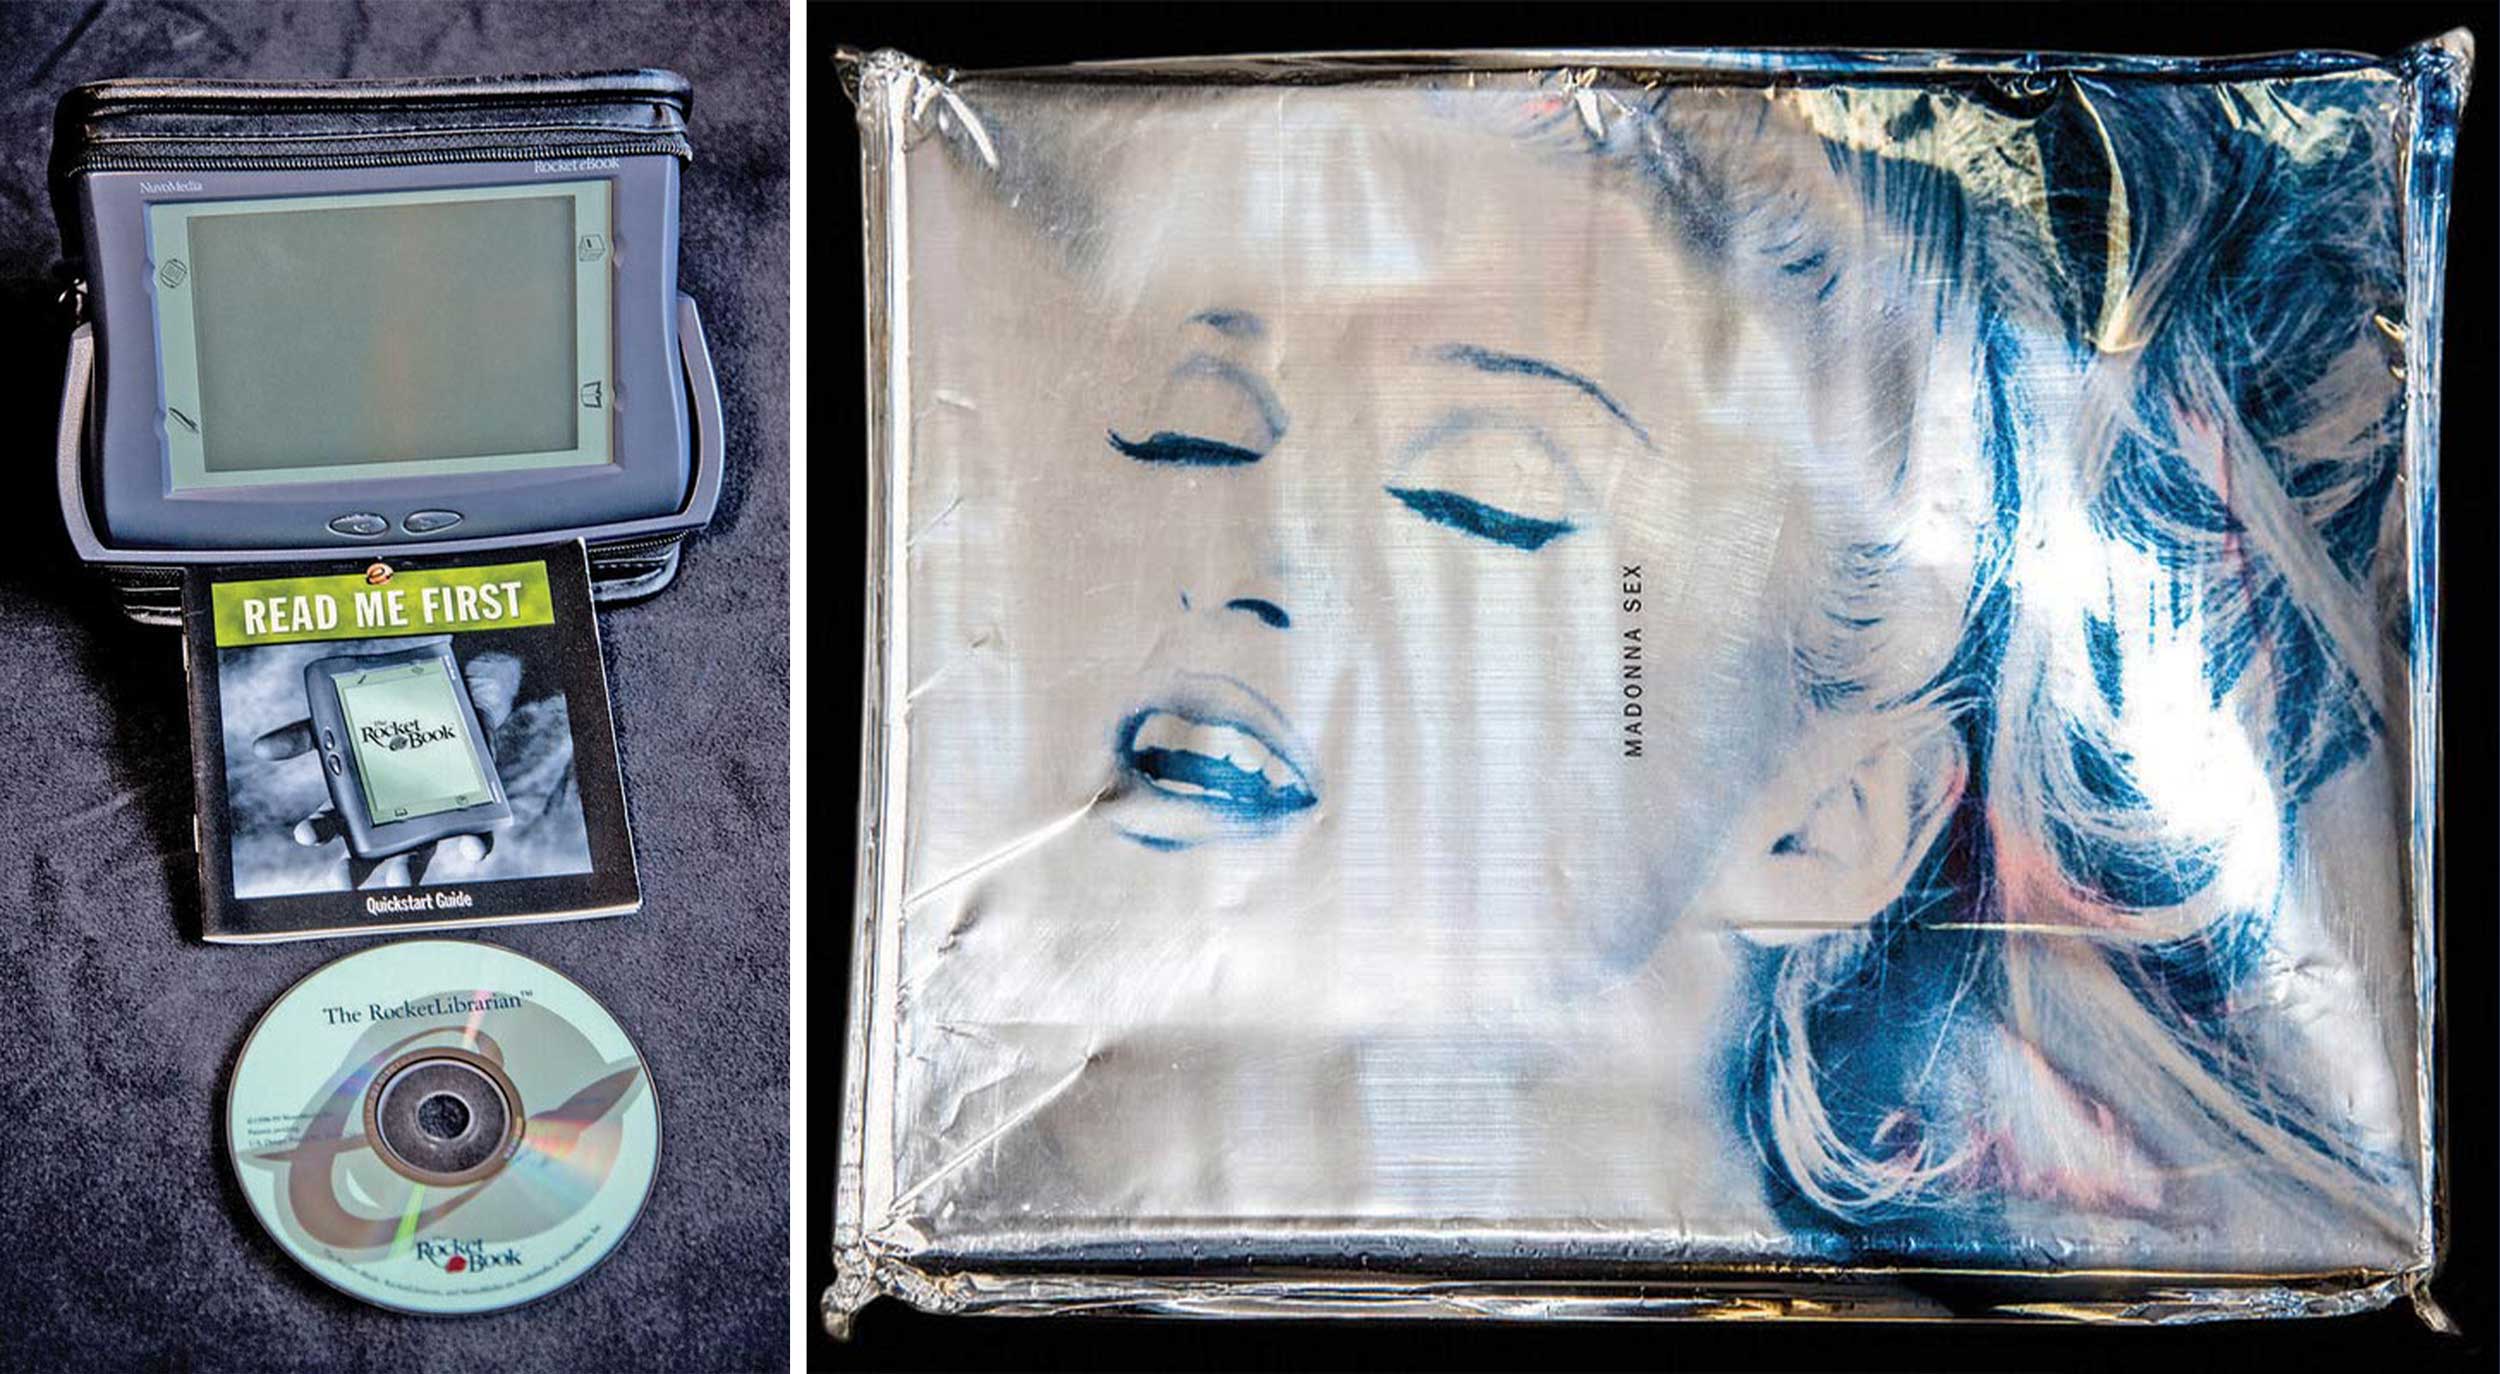 left Rocket book machine with guide and cd right: headshot of Madonna